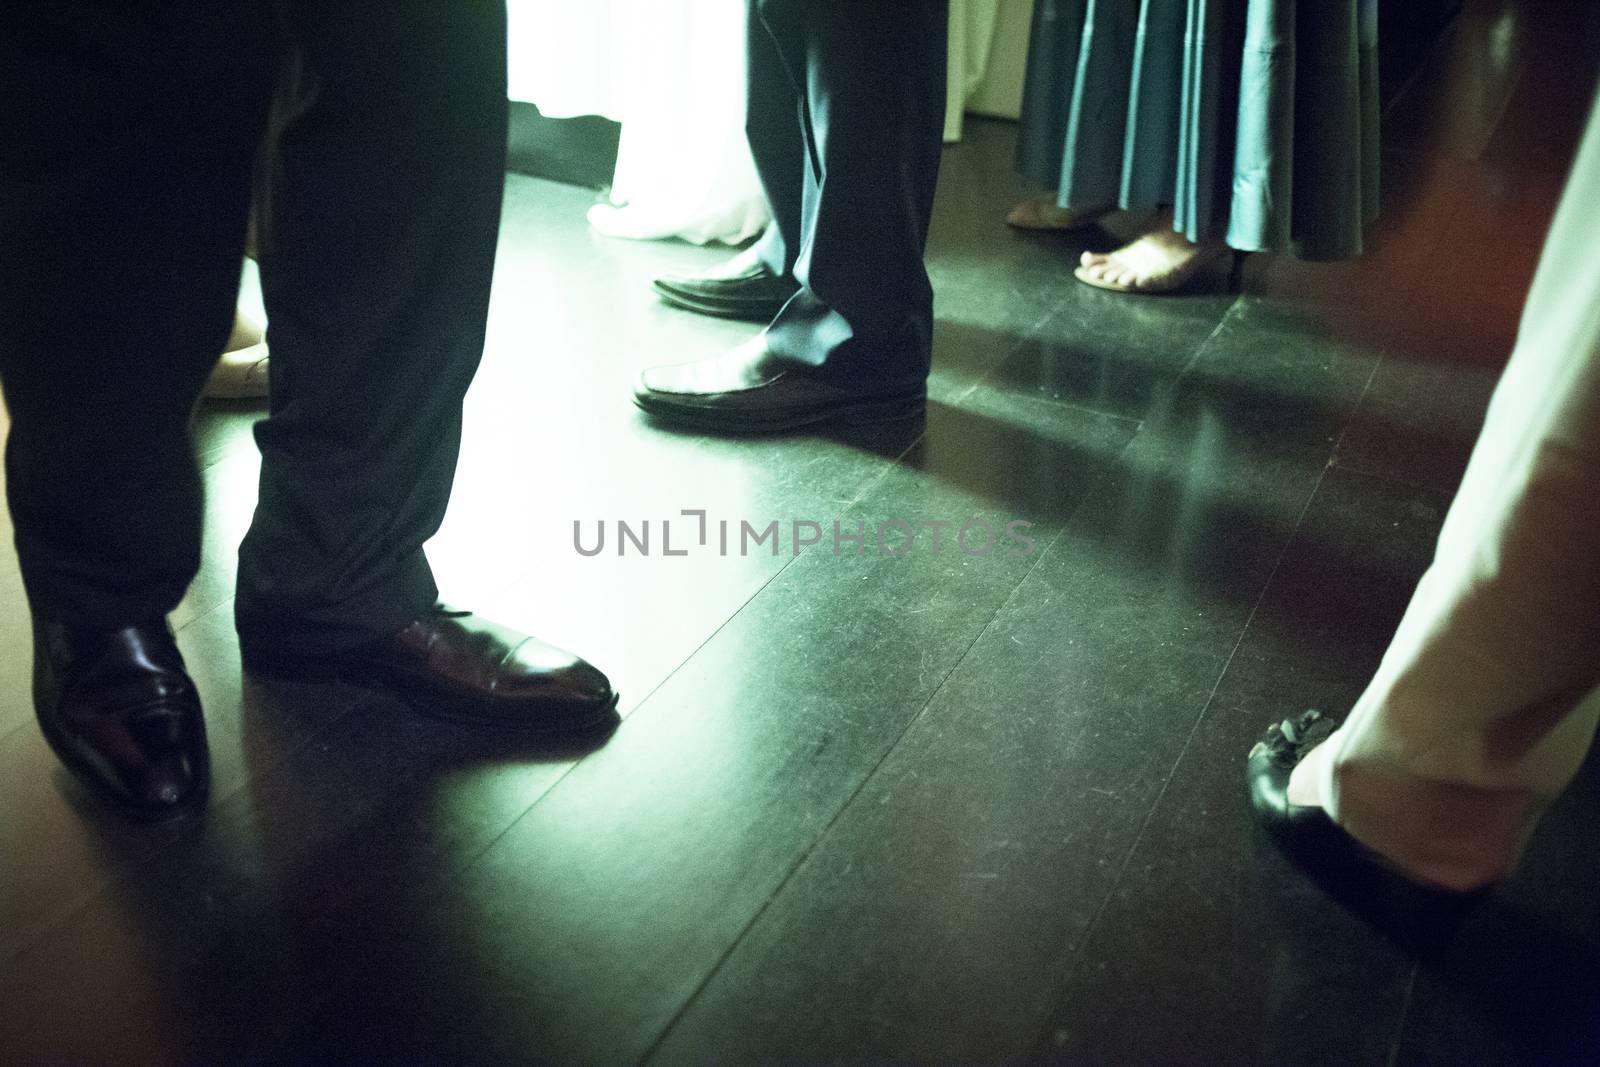 Legs of man and lady in social event wedding party by edwardolive